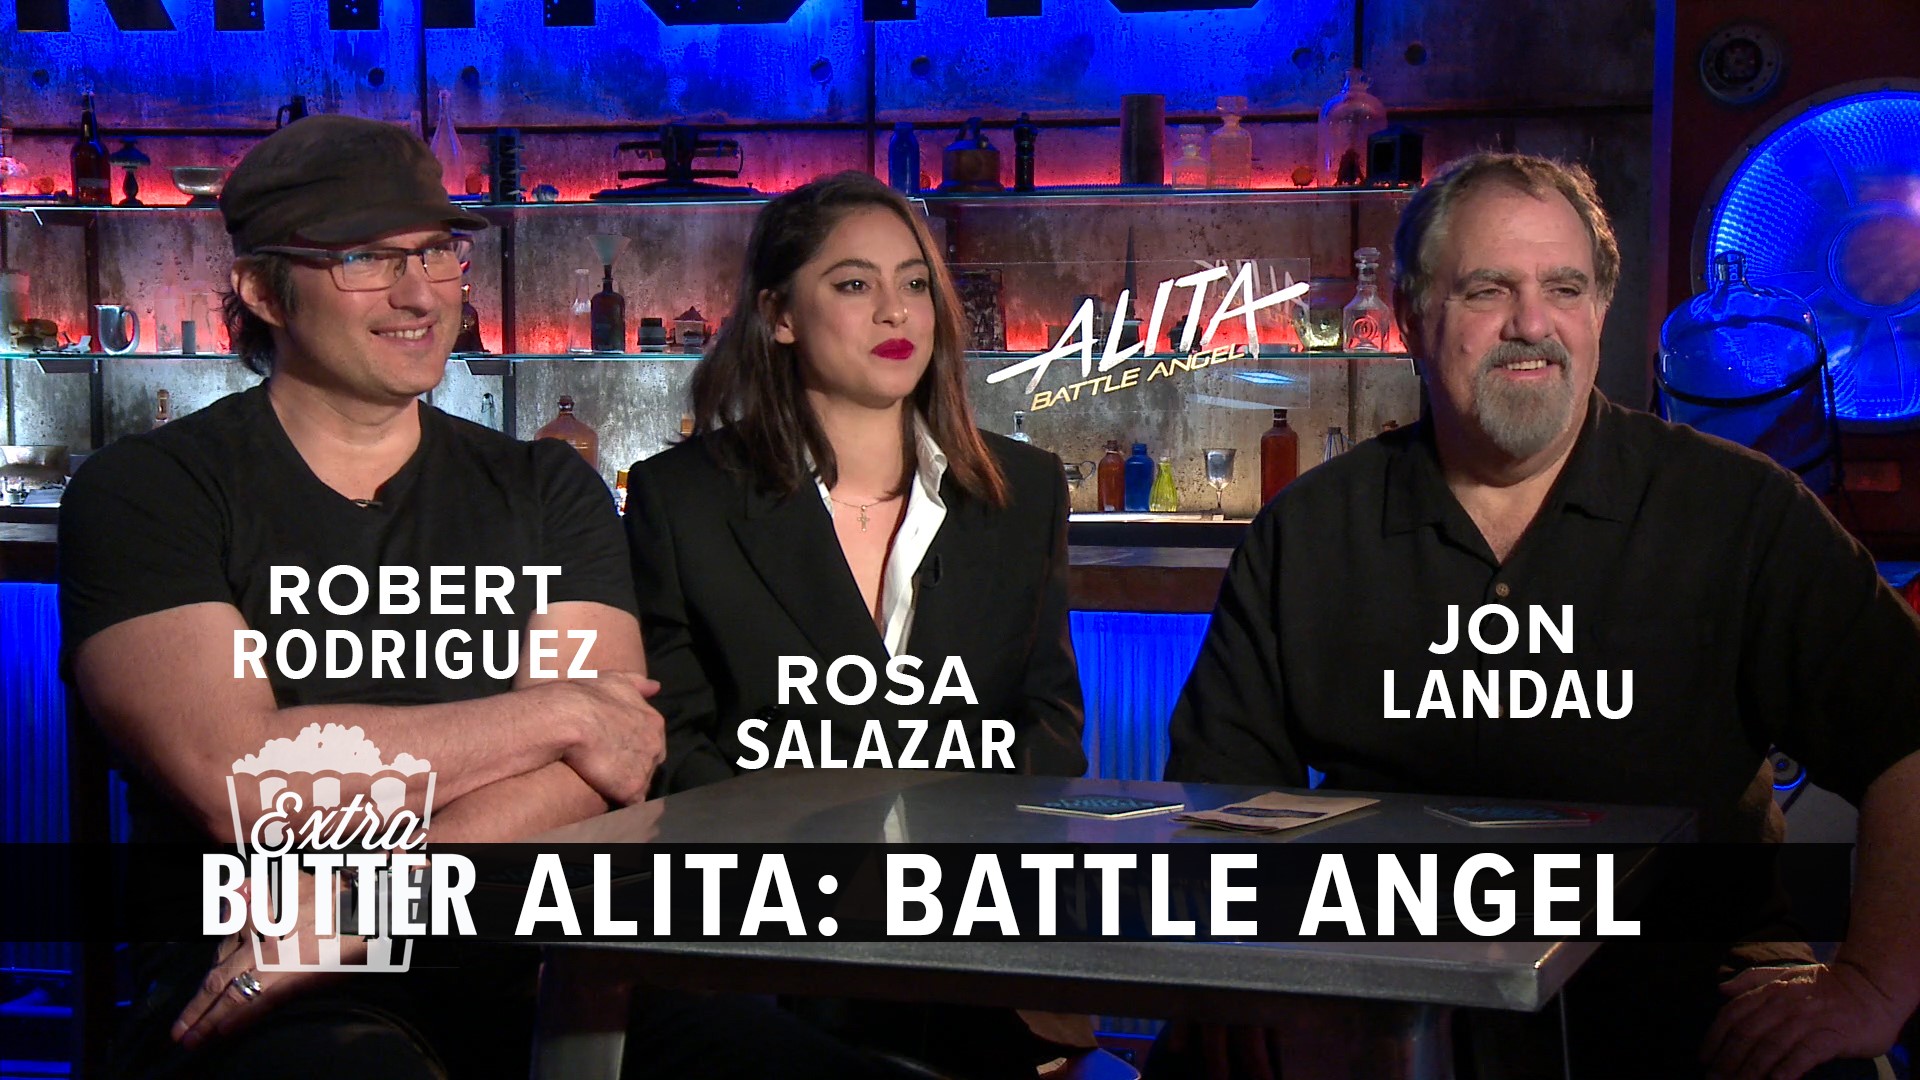 Meet Alita. Actress Rosa Salazar talks about the important role a parking ticket has in her becoming Alita. Robert Rodriguez and Jon Landau also join Mark S. Allen to talk about the performance capture in the movie based on the manga series. Interview arranged by 20th Century Fox.